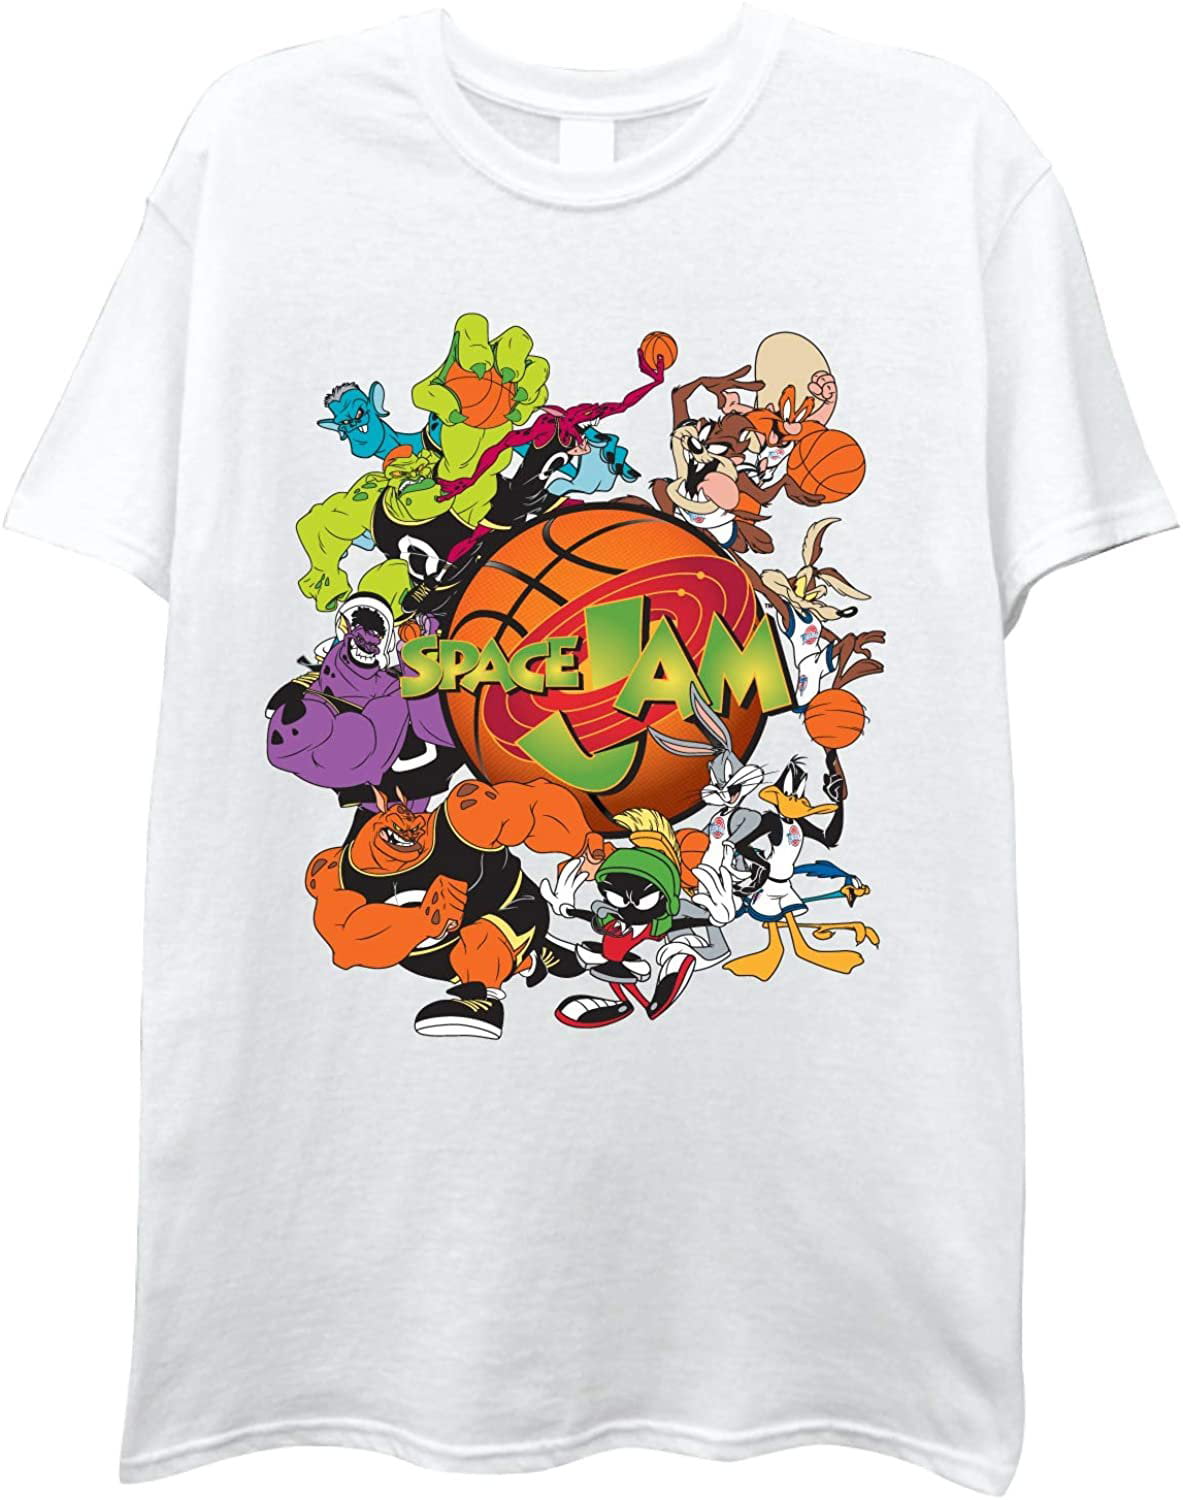 space jam Mens Classic Shirt - Tune Squad Marvin & Bugs Bunny Tee 90s ...